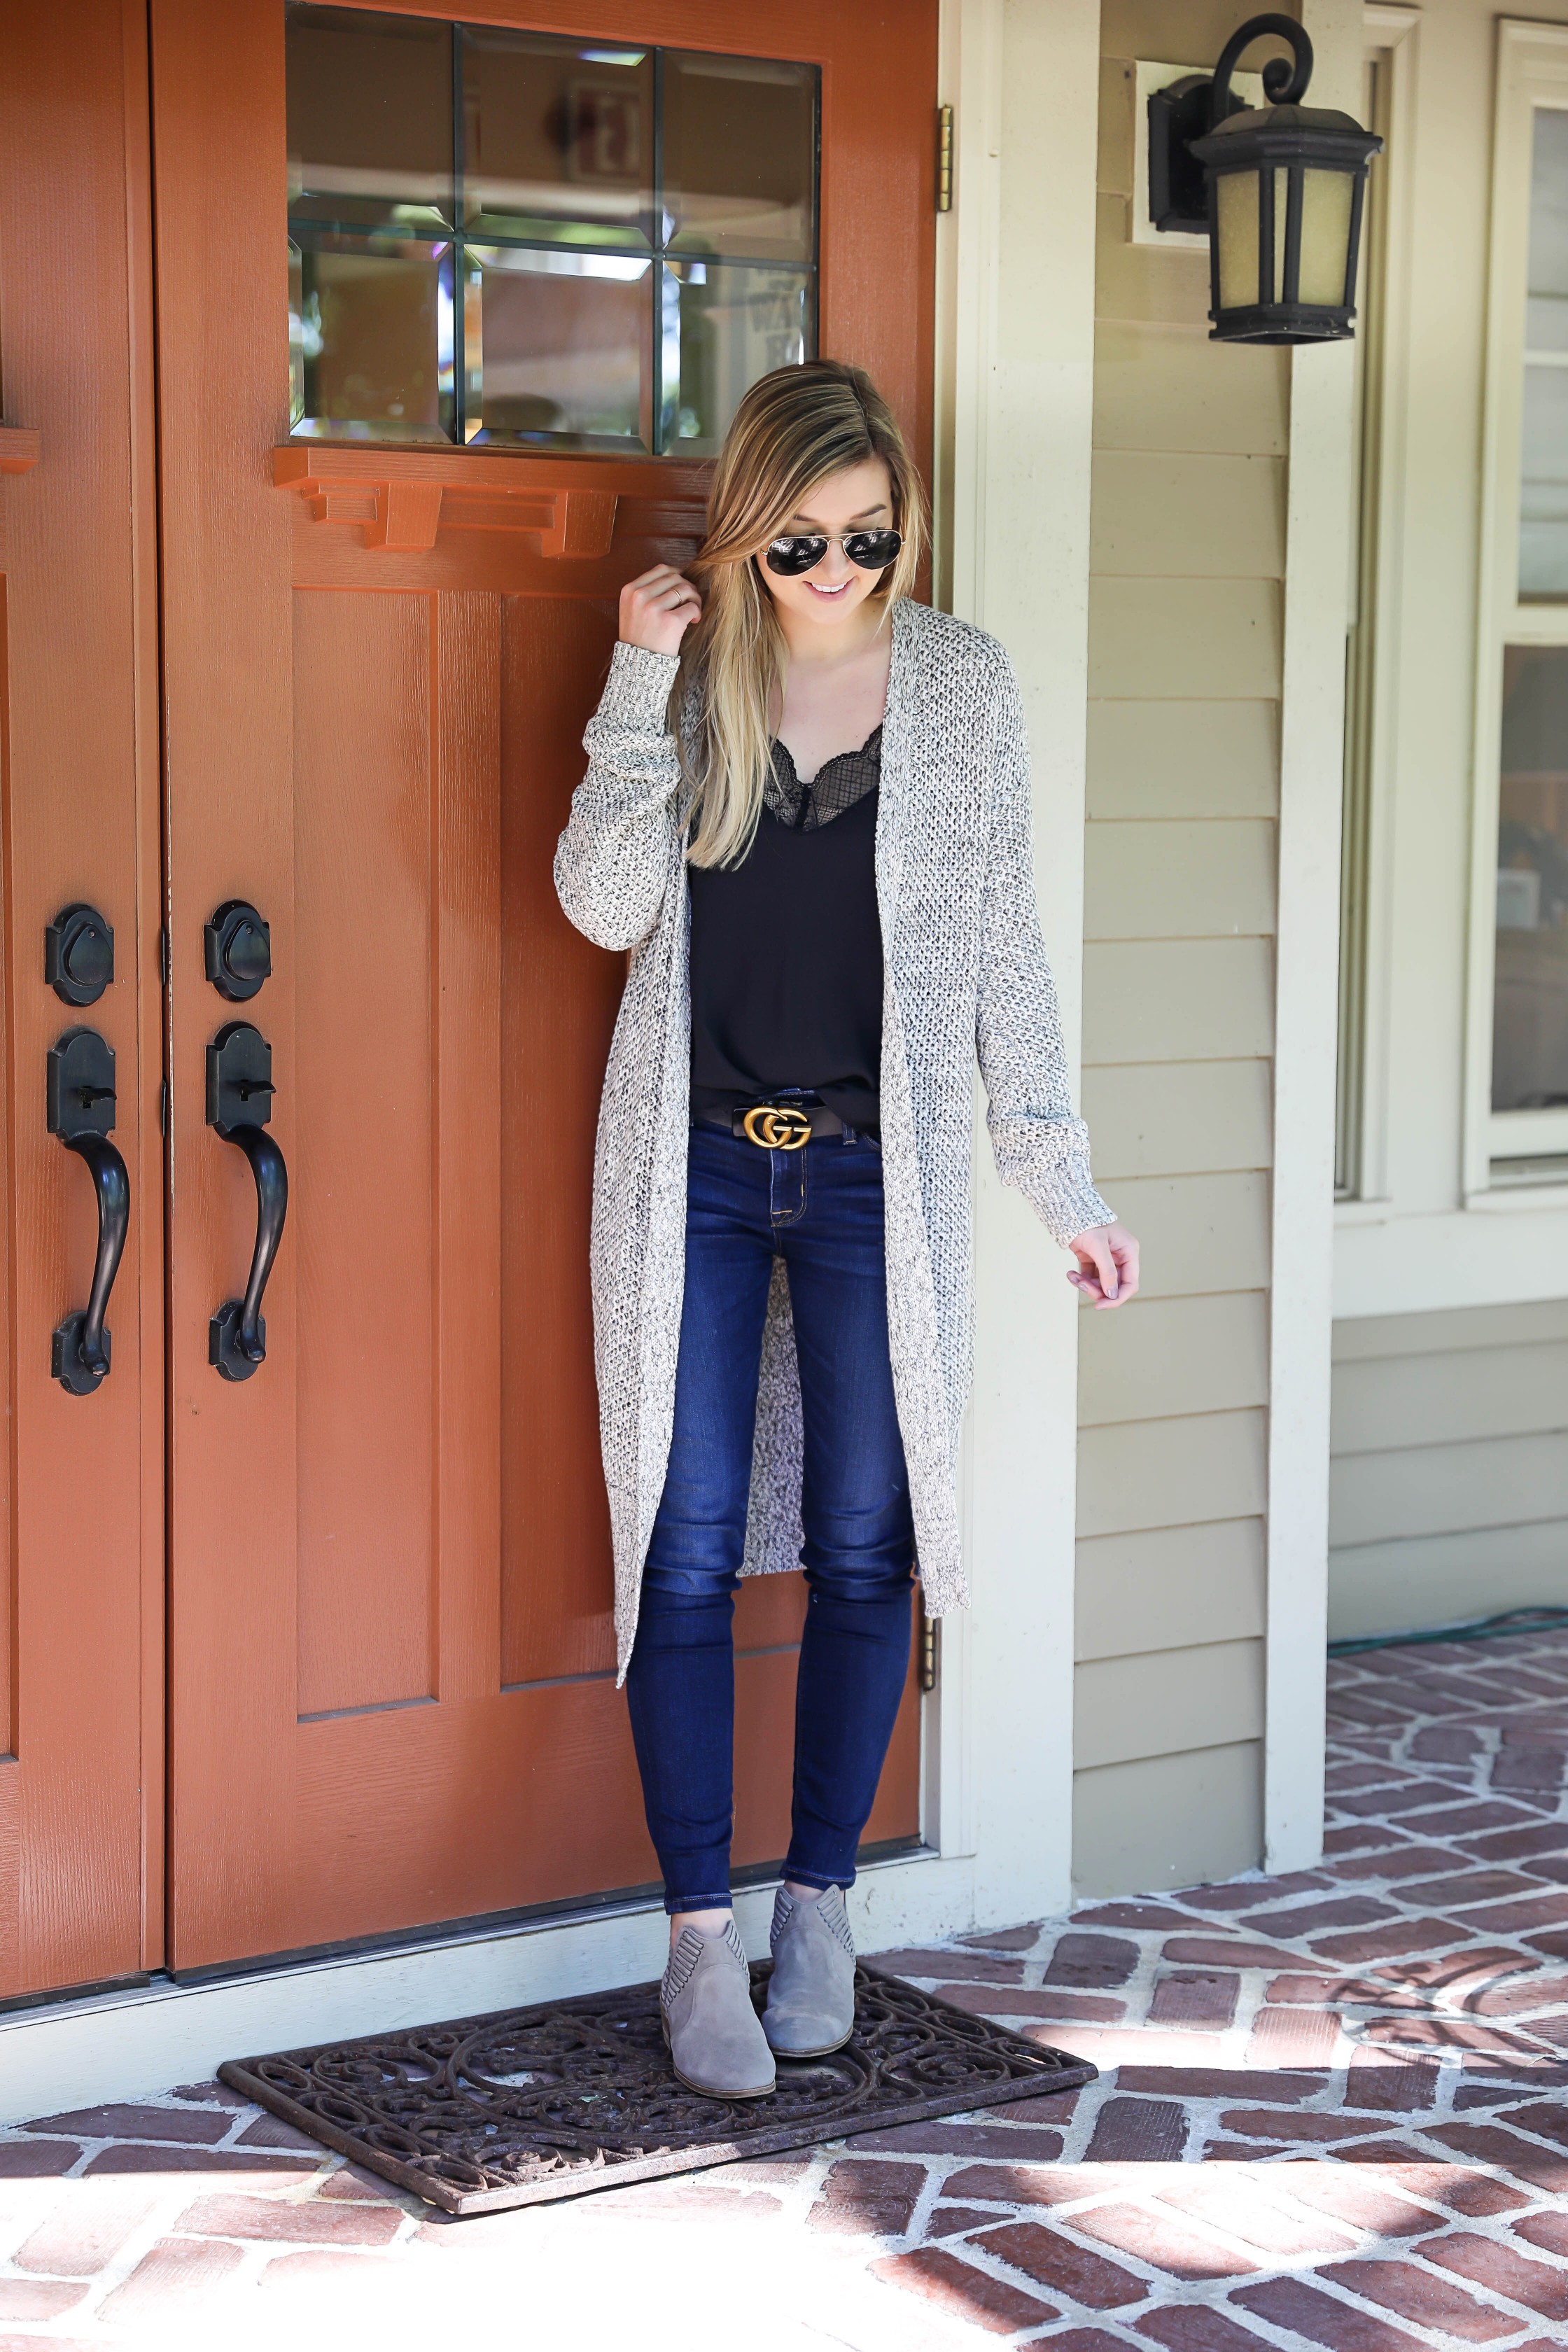 Black cami with long grery knitted duster! Perfect fall outfit paired with a cute gucci belt and dark denim jeans! I am also wearing my vince camuto booties that I love for autumn! Details on fashion blog daily dose of charm by lauren lindmark